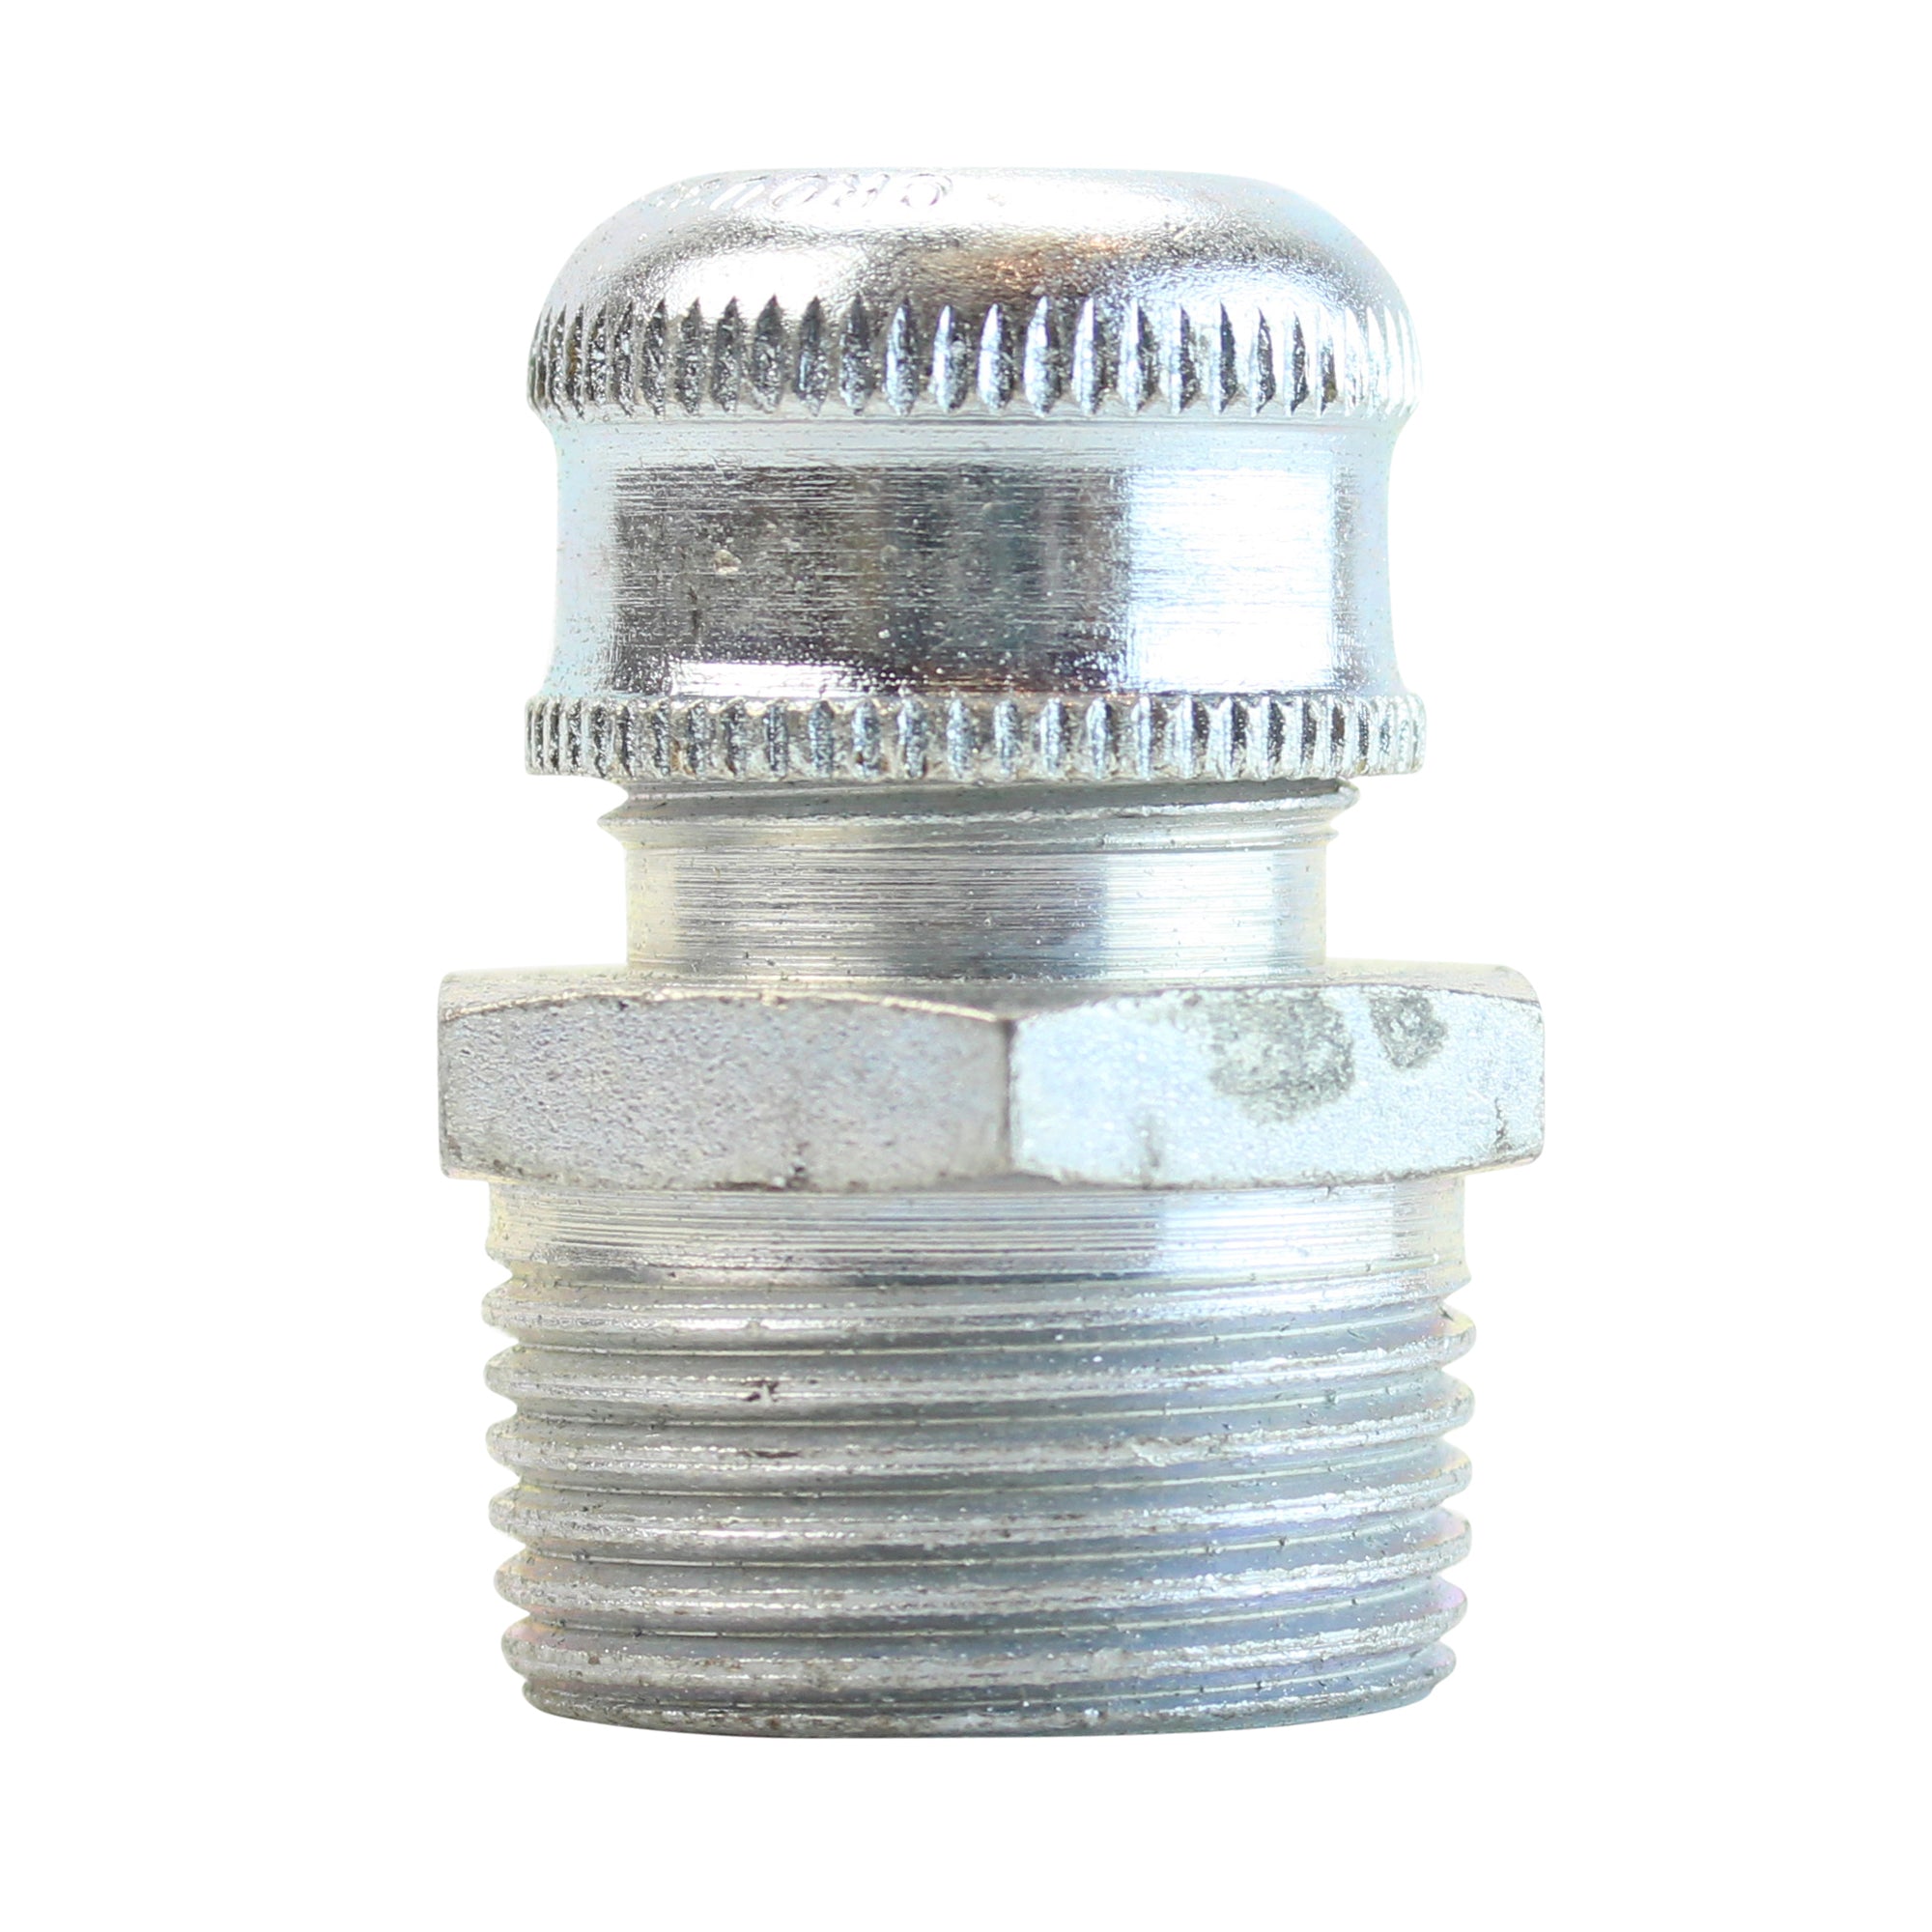 Crouse Hinds, CROUSE-HINDS CGB393 STRAIGHT BODY MALE THREADED CORD & CABLE FITTING, 1" FLEX